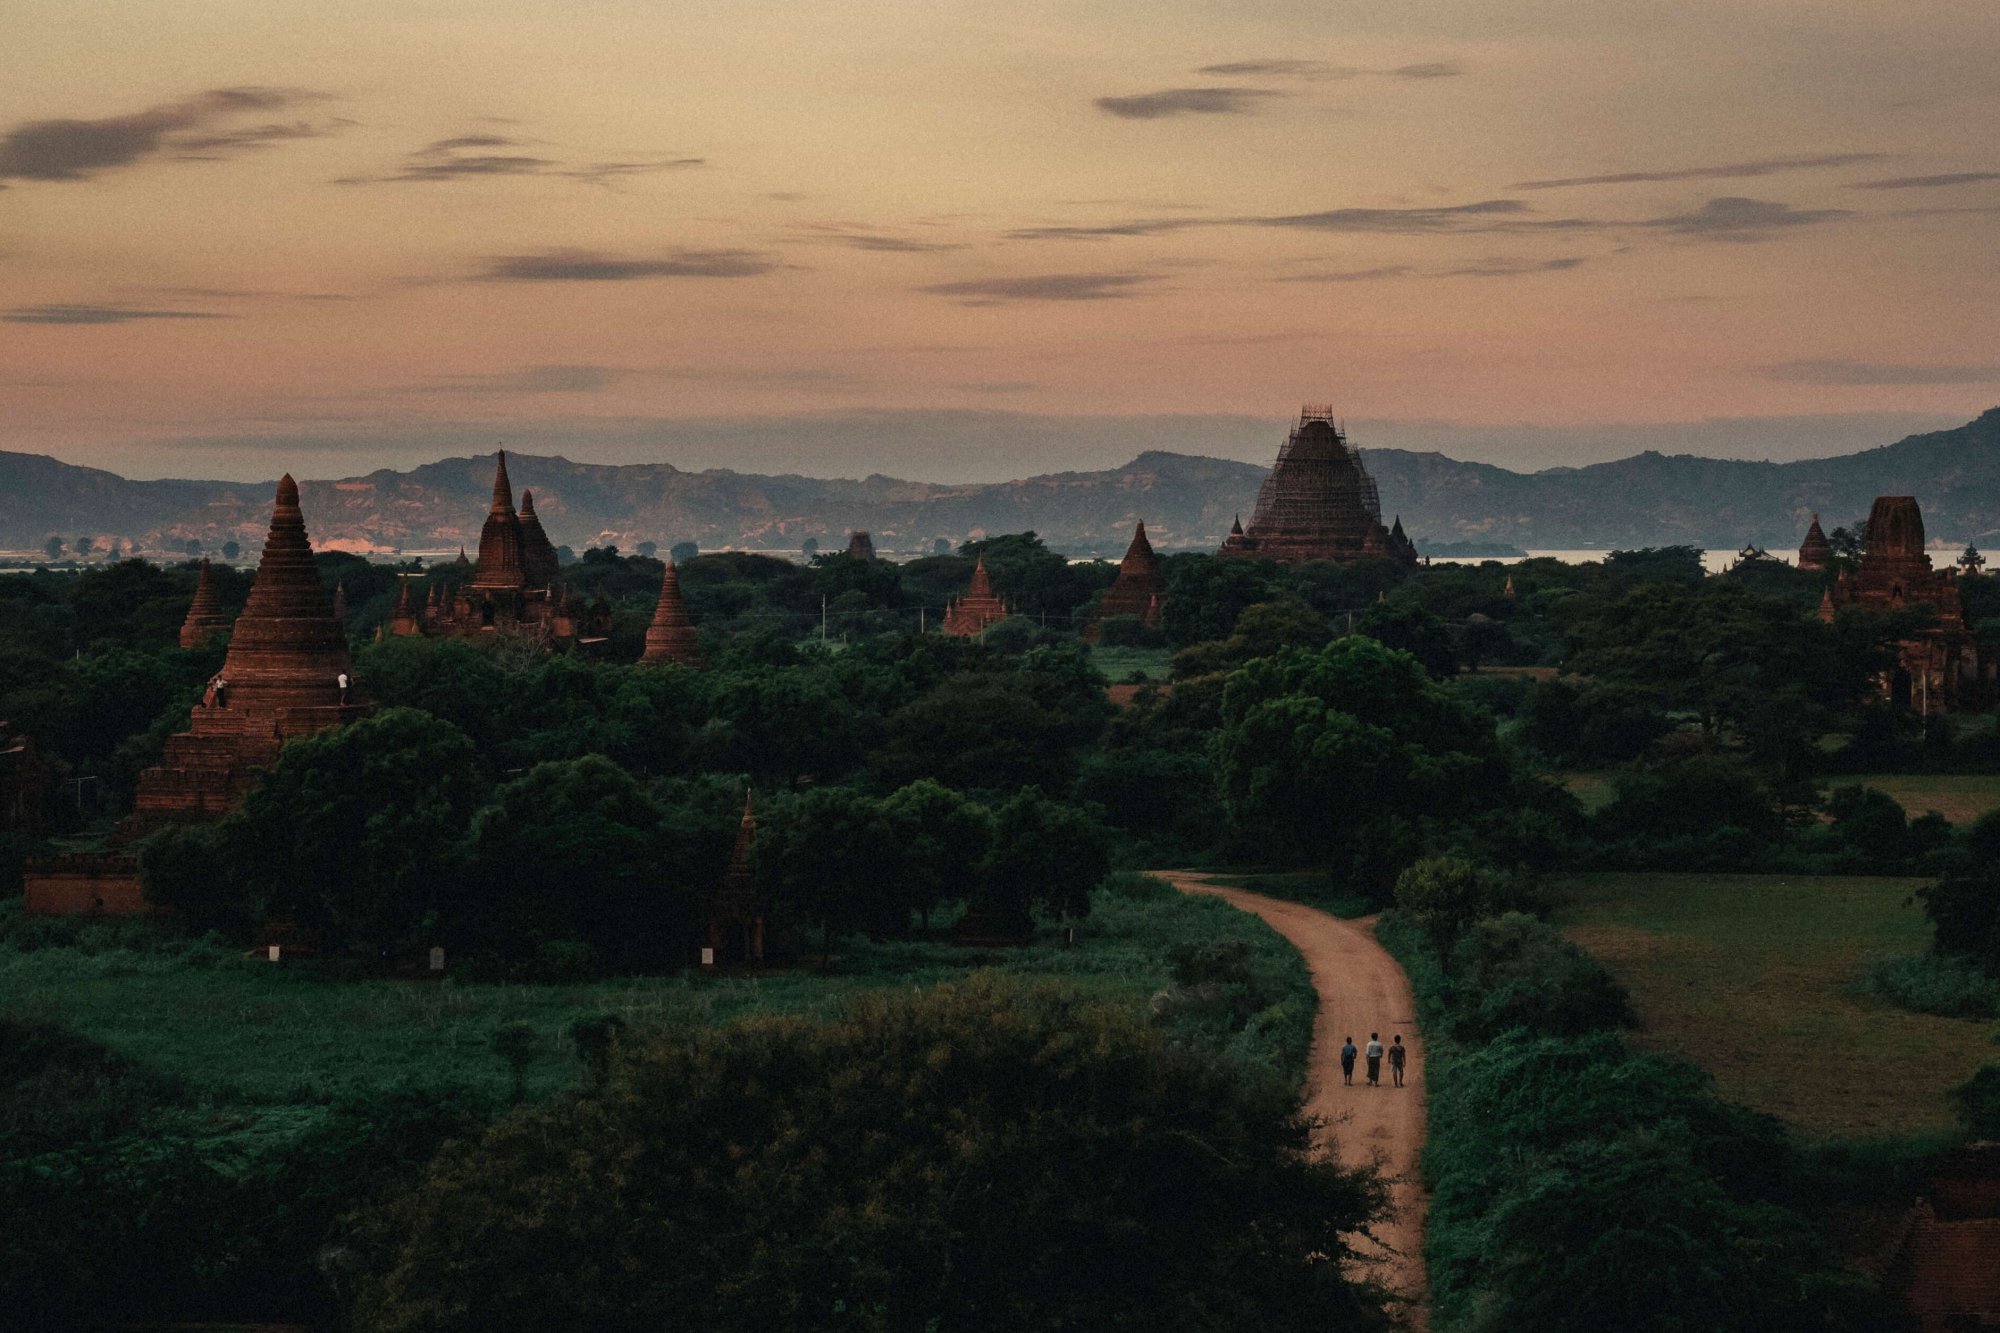 The Temple route in Myanmar